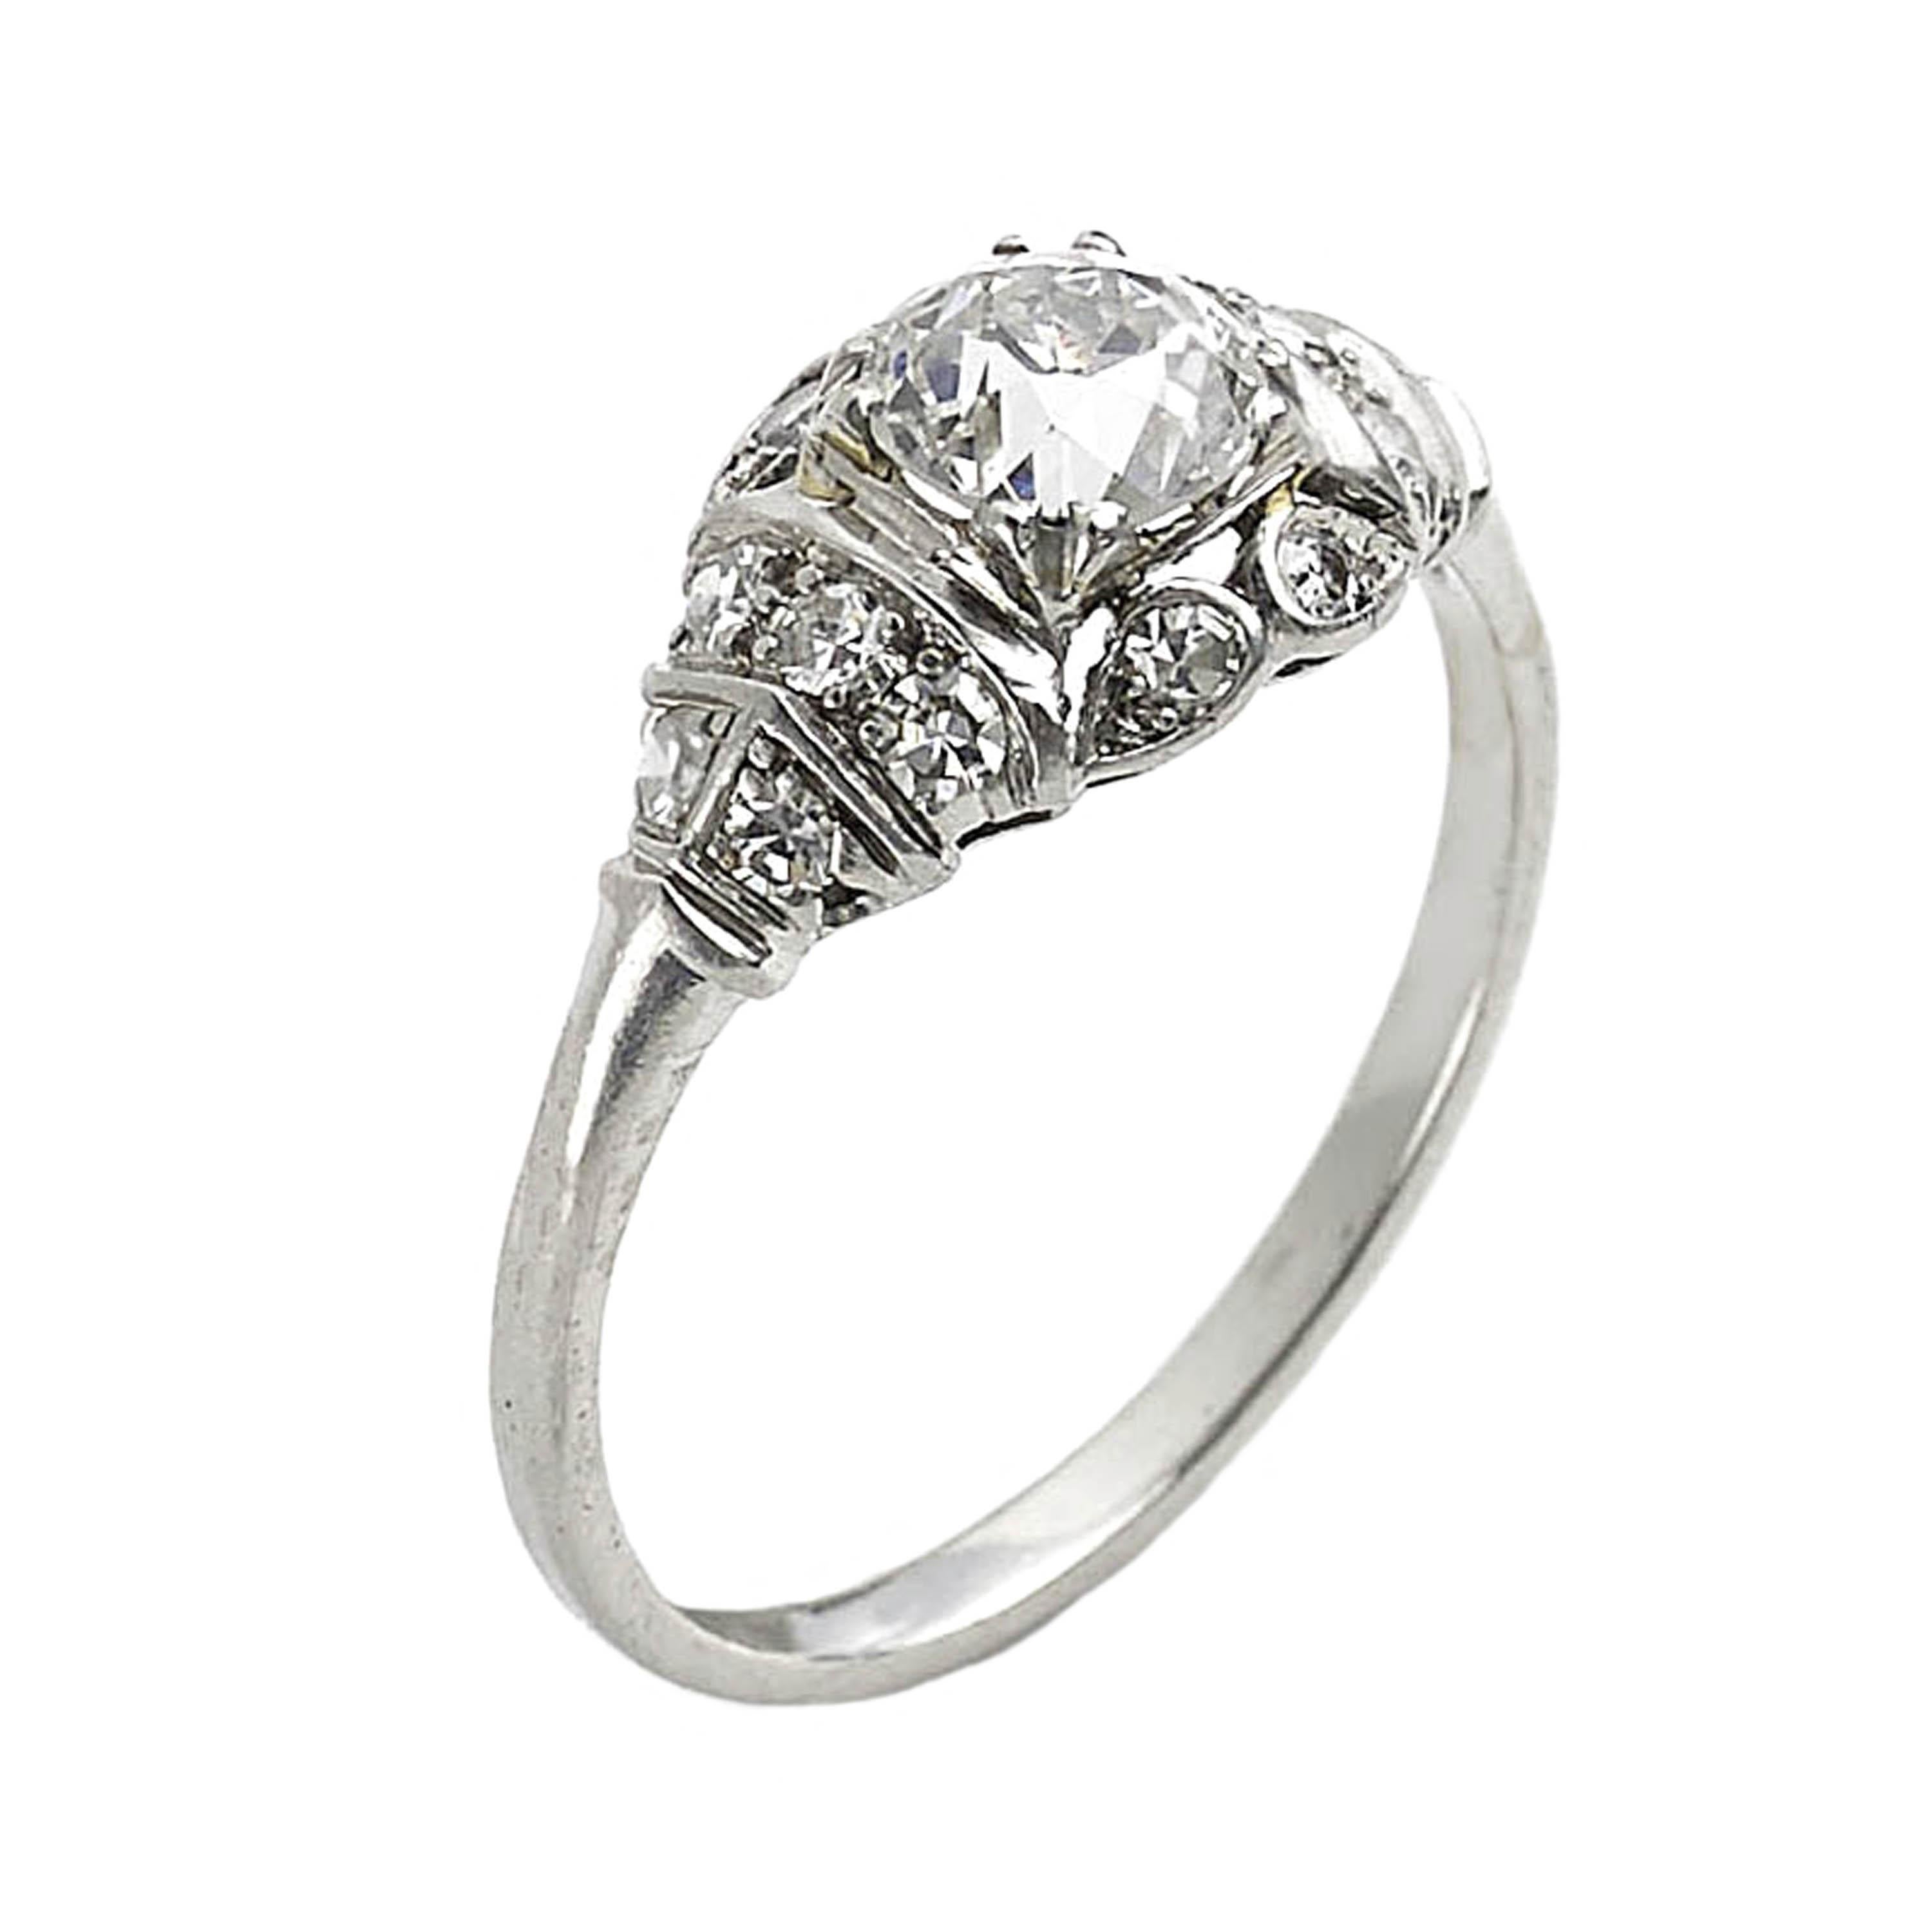 A late Art Deco diamond ring, set with a 0.85ct, H colour, SI1 clarity, Edwardian-cut diamond, in a four double claw setting, with an eight-cut diamond grain set, decorative surround and shoulders, mounted in platinum,  made in the USA, circa 1940.